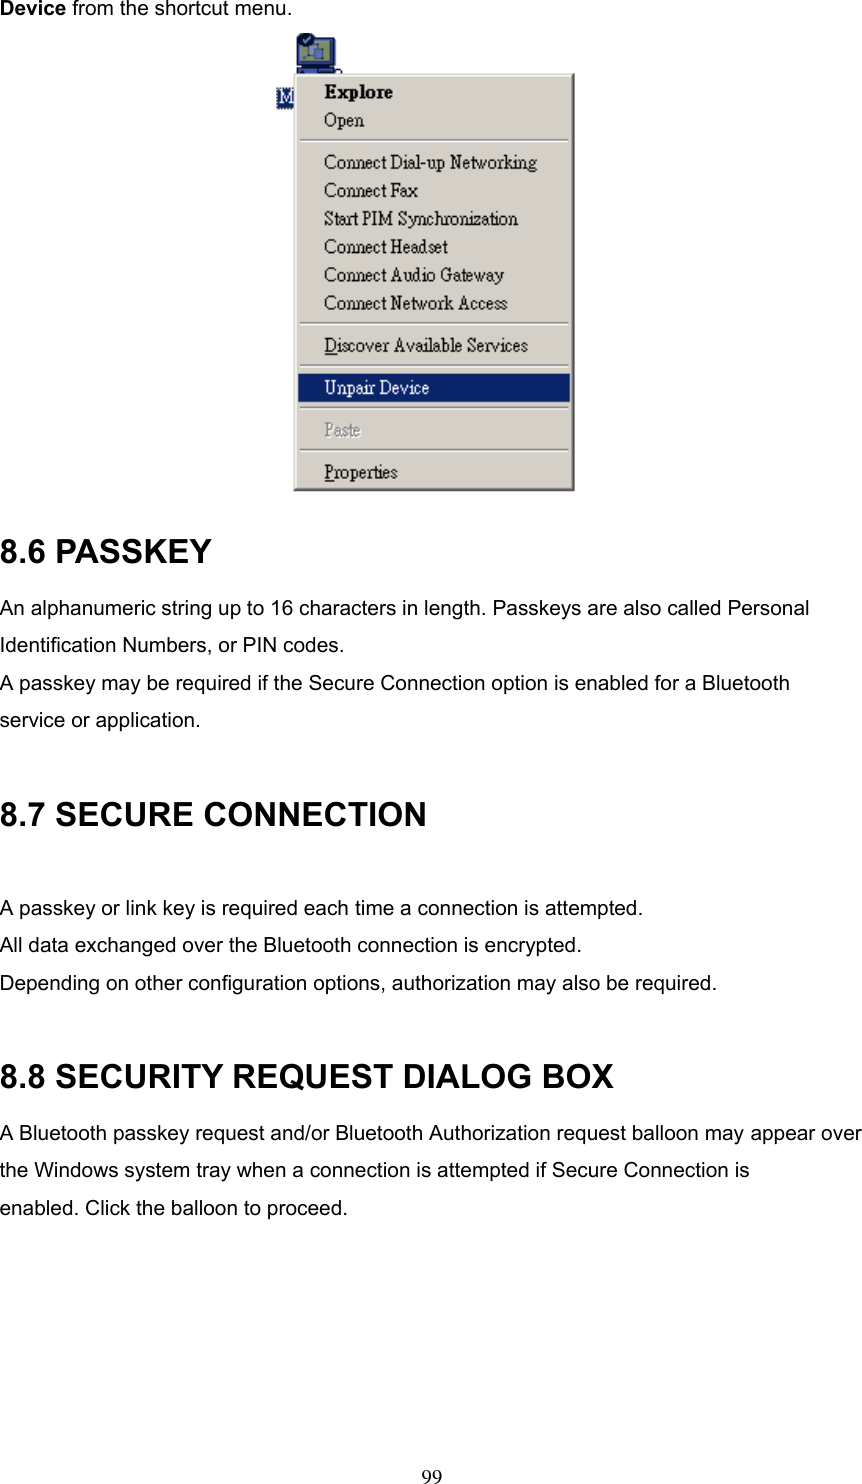 Device from the shortcut menu.  8.6 PASSKEY An alphanumeric string up to 16 characters in length. Passkeys are also called Personal Identification Numbers, or PIN codes. A passkey may be required if the Secure Connection option is enabled for a Bluetooth service or application.  8.7 SECURE CONNECTION  A passkey or link key is required each time a connection is attempted. All data exchanged over the Bluetooth connection is encrypted. Depending on other configuration options, authorization may also be required.  8.8 SECURITY REQUEST DIALOG BOX A Bluetooth passkey request and/or Bluetooth Authorization request balloon may appear over the Windows system tray when a connection is attempted if Secure Connection is enabled. Click the balloon to proceed.  99 